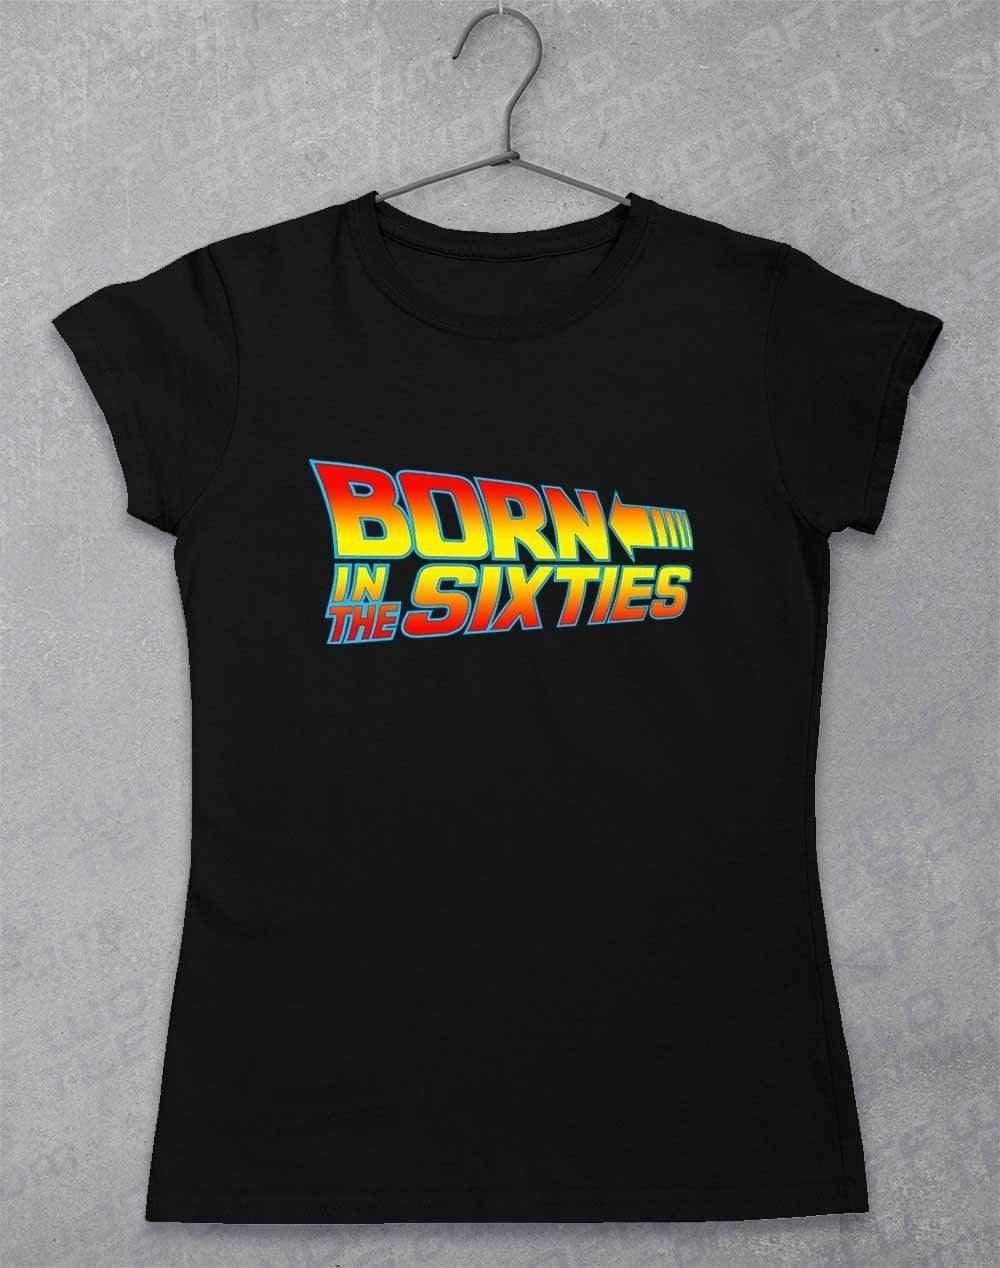 Born in the... (CHOOSE YOUR DECADE!) Women's T-shirt 1960s - Black / 8-10  - Off World Tees